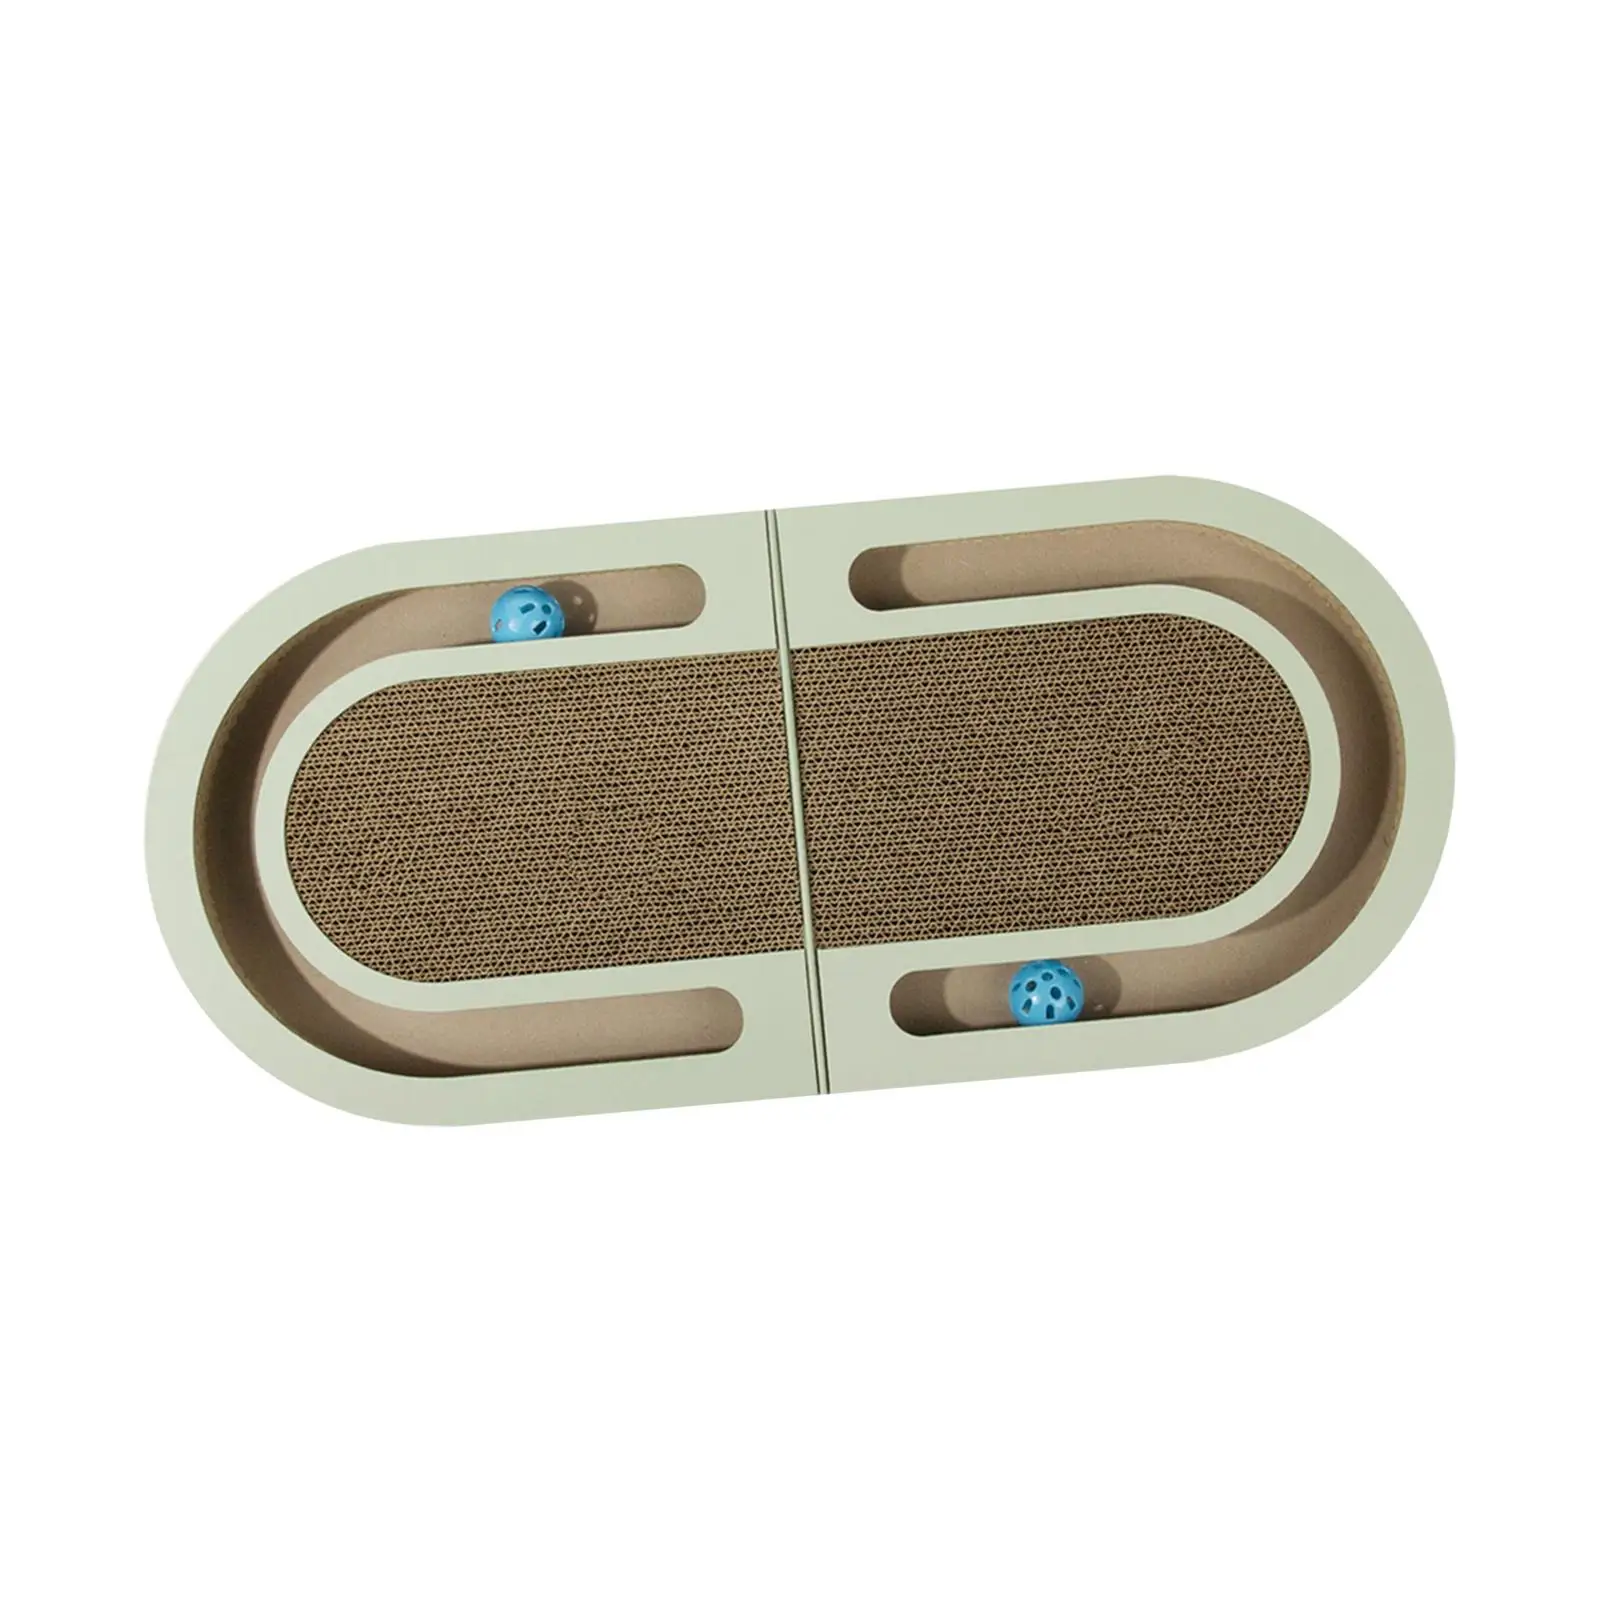 Cat Scratcher Cardboard Sofa Furniture Protector Ball Track Toys Scratching Lounge Bed for Small Medium Large Cats Resting Kitty